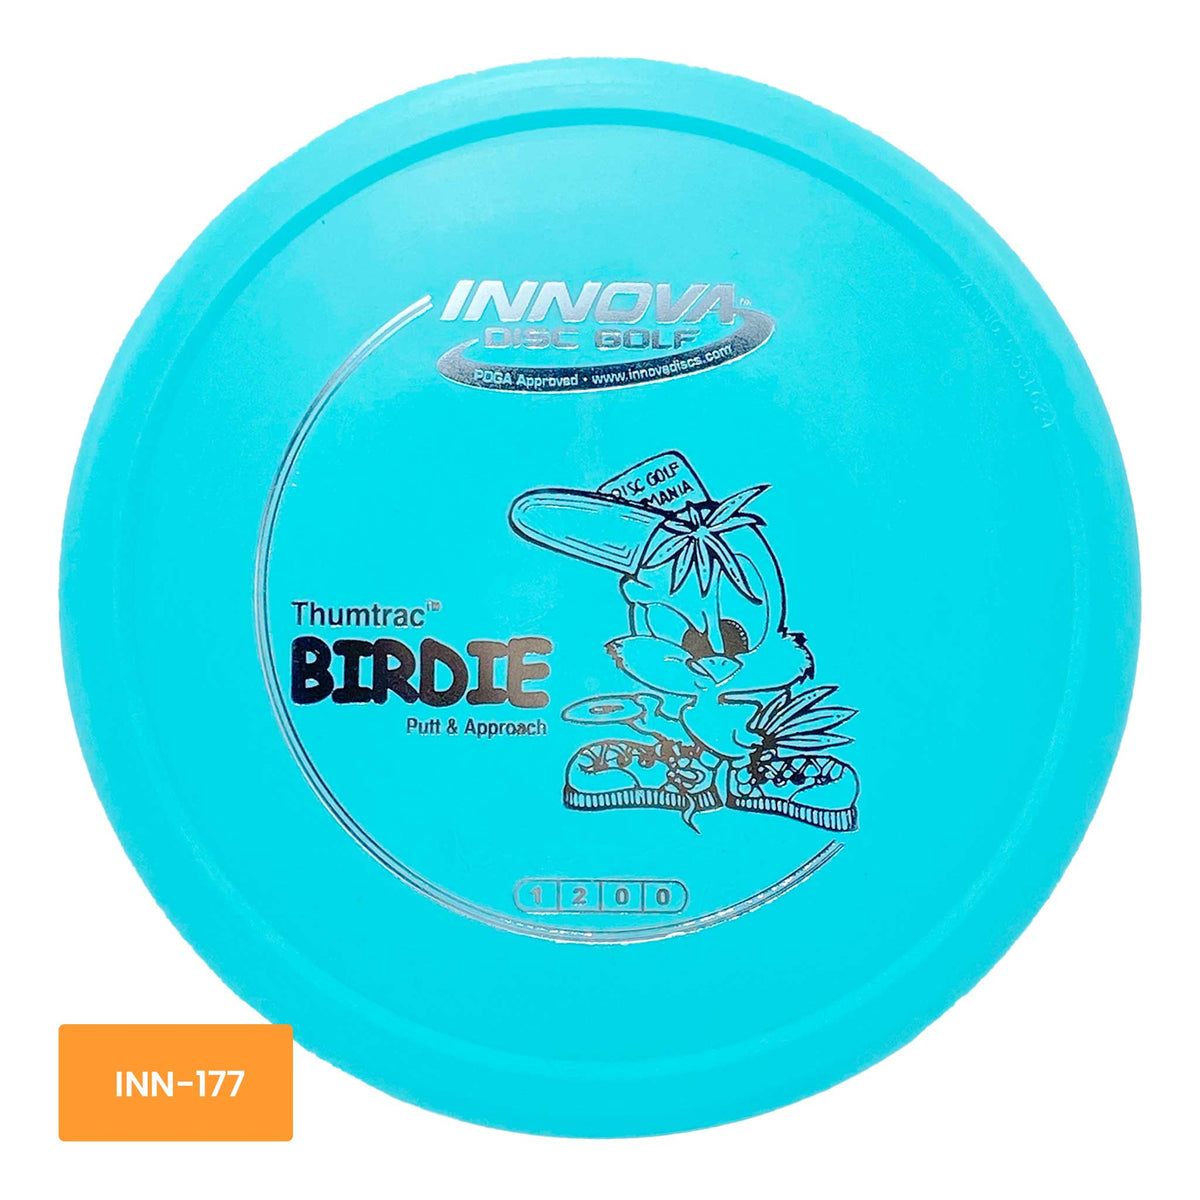 Innova Disc Golf DX Birdie putter and approach - Teal / Silver